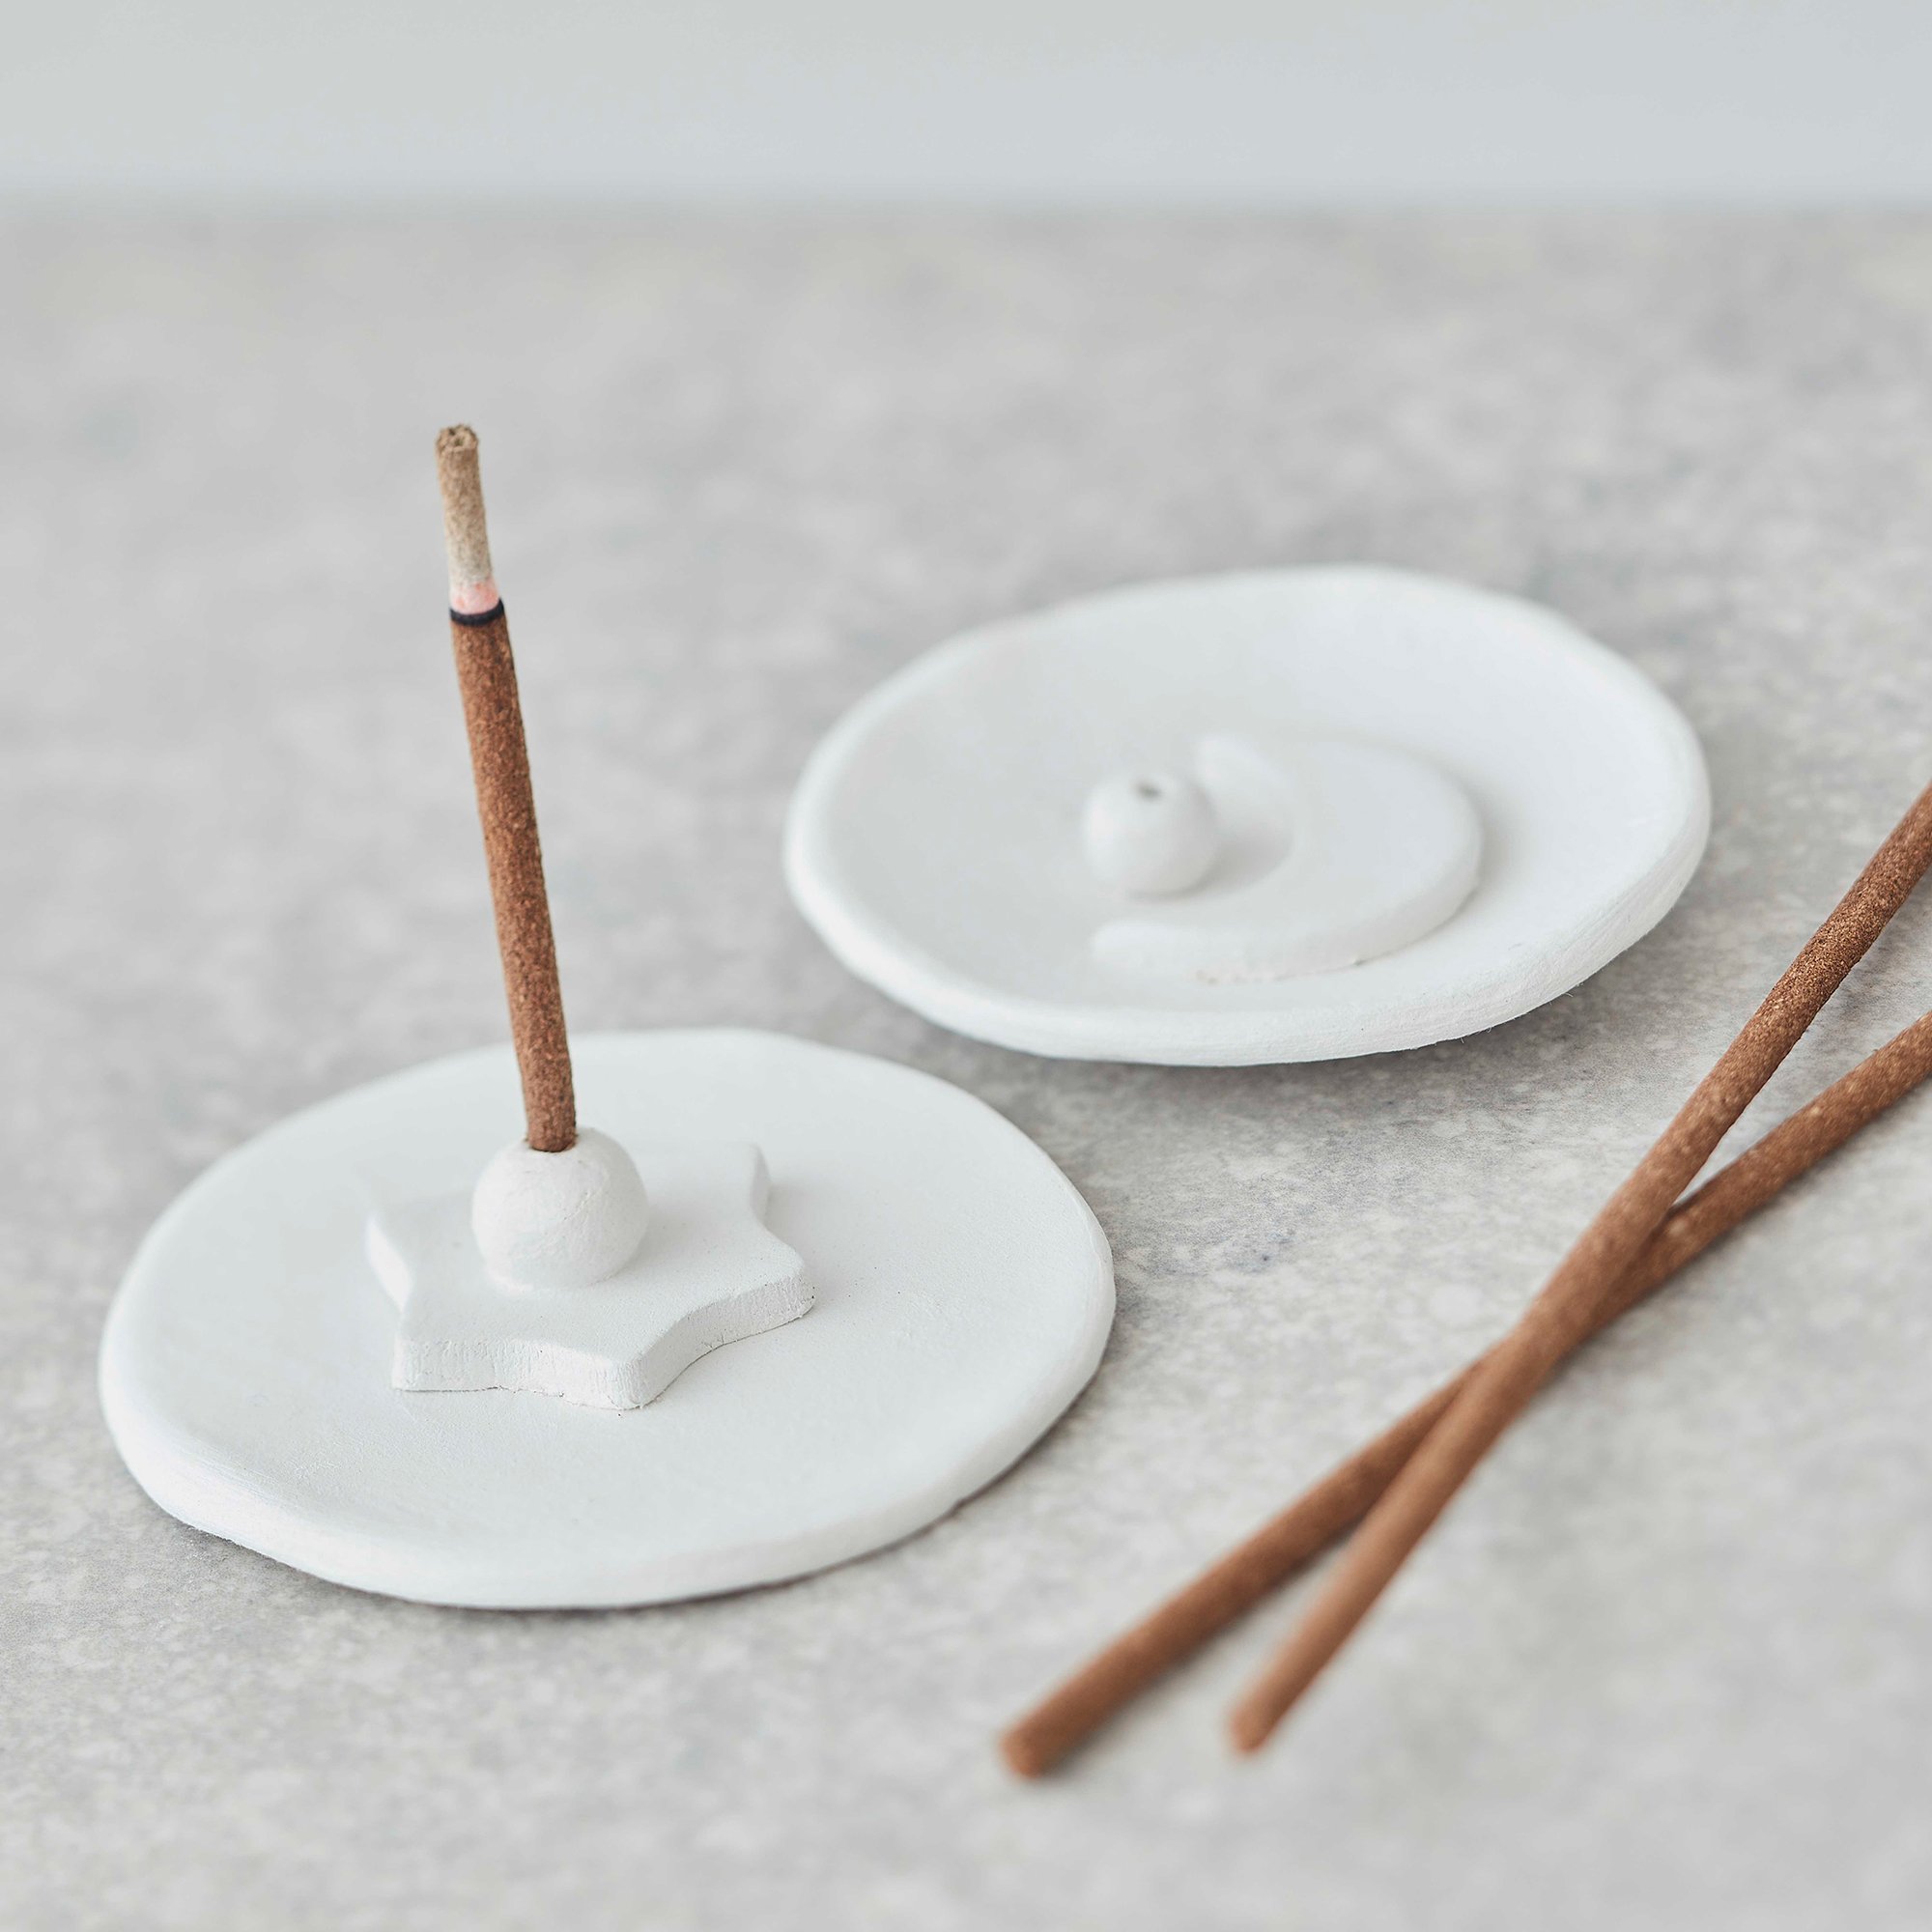 How to Make an Air Dry Clay Incense Holder | Hobbycraft